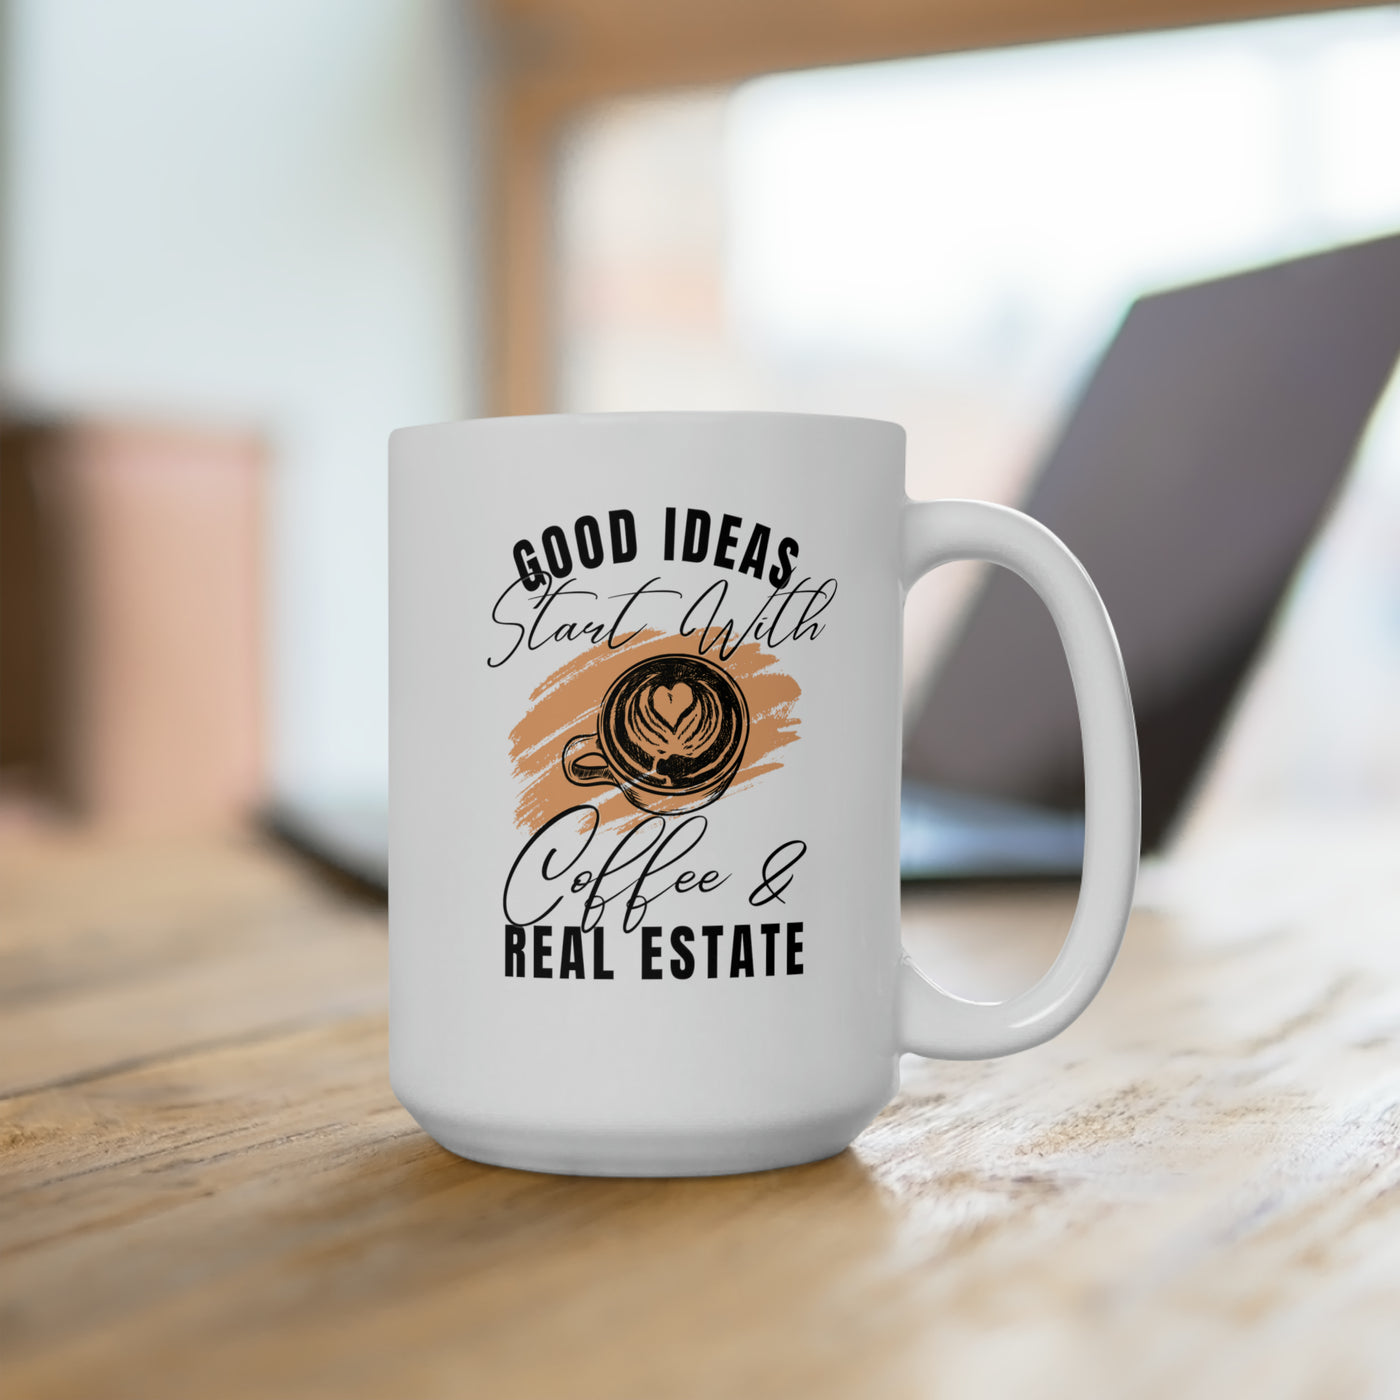 Good Ideas start with coffee and real estate